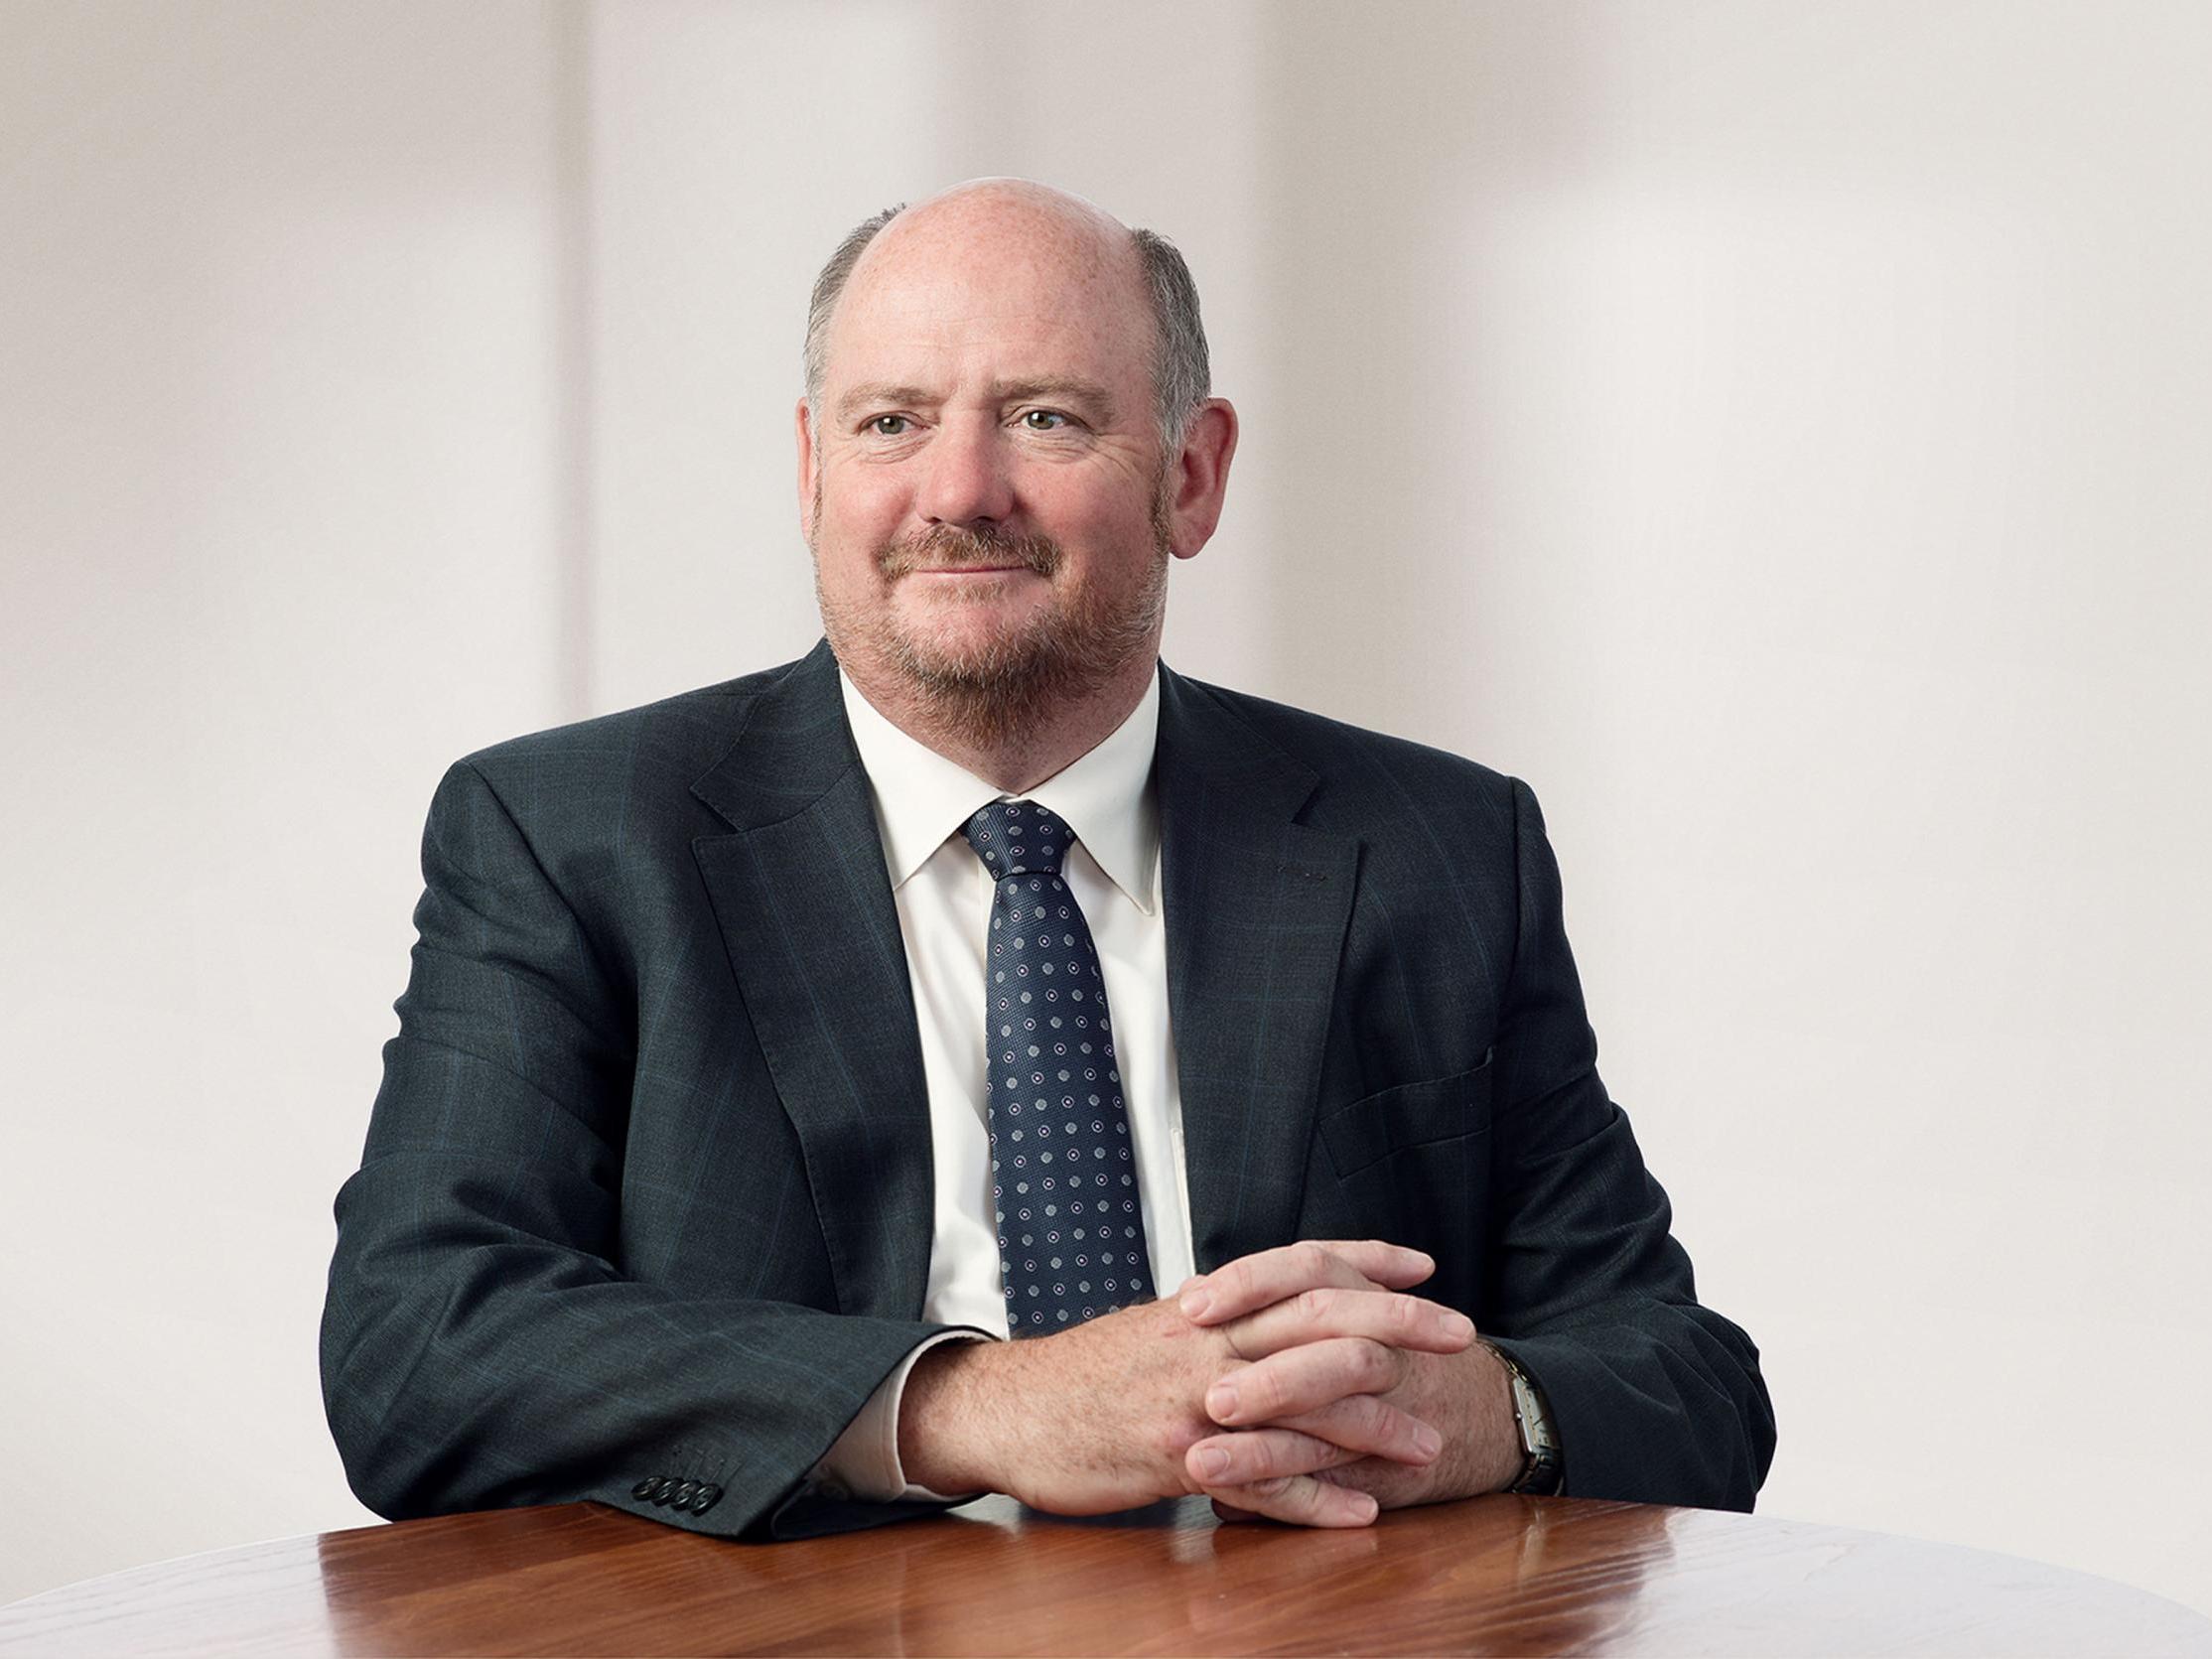 Businessman Richard Cousins died in a seaplane crash alongside most of his immediate family in December 2017